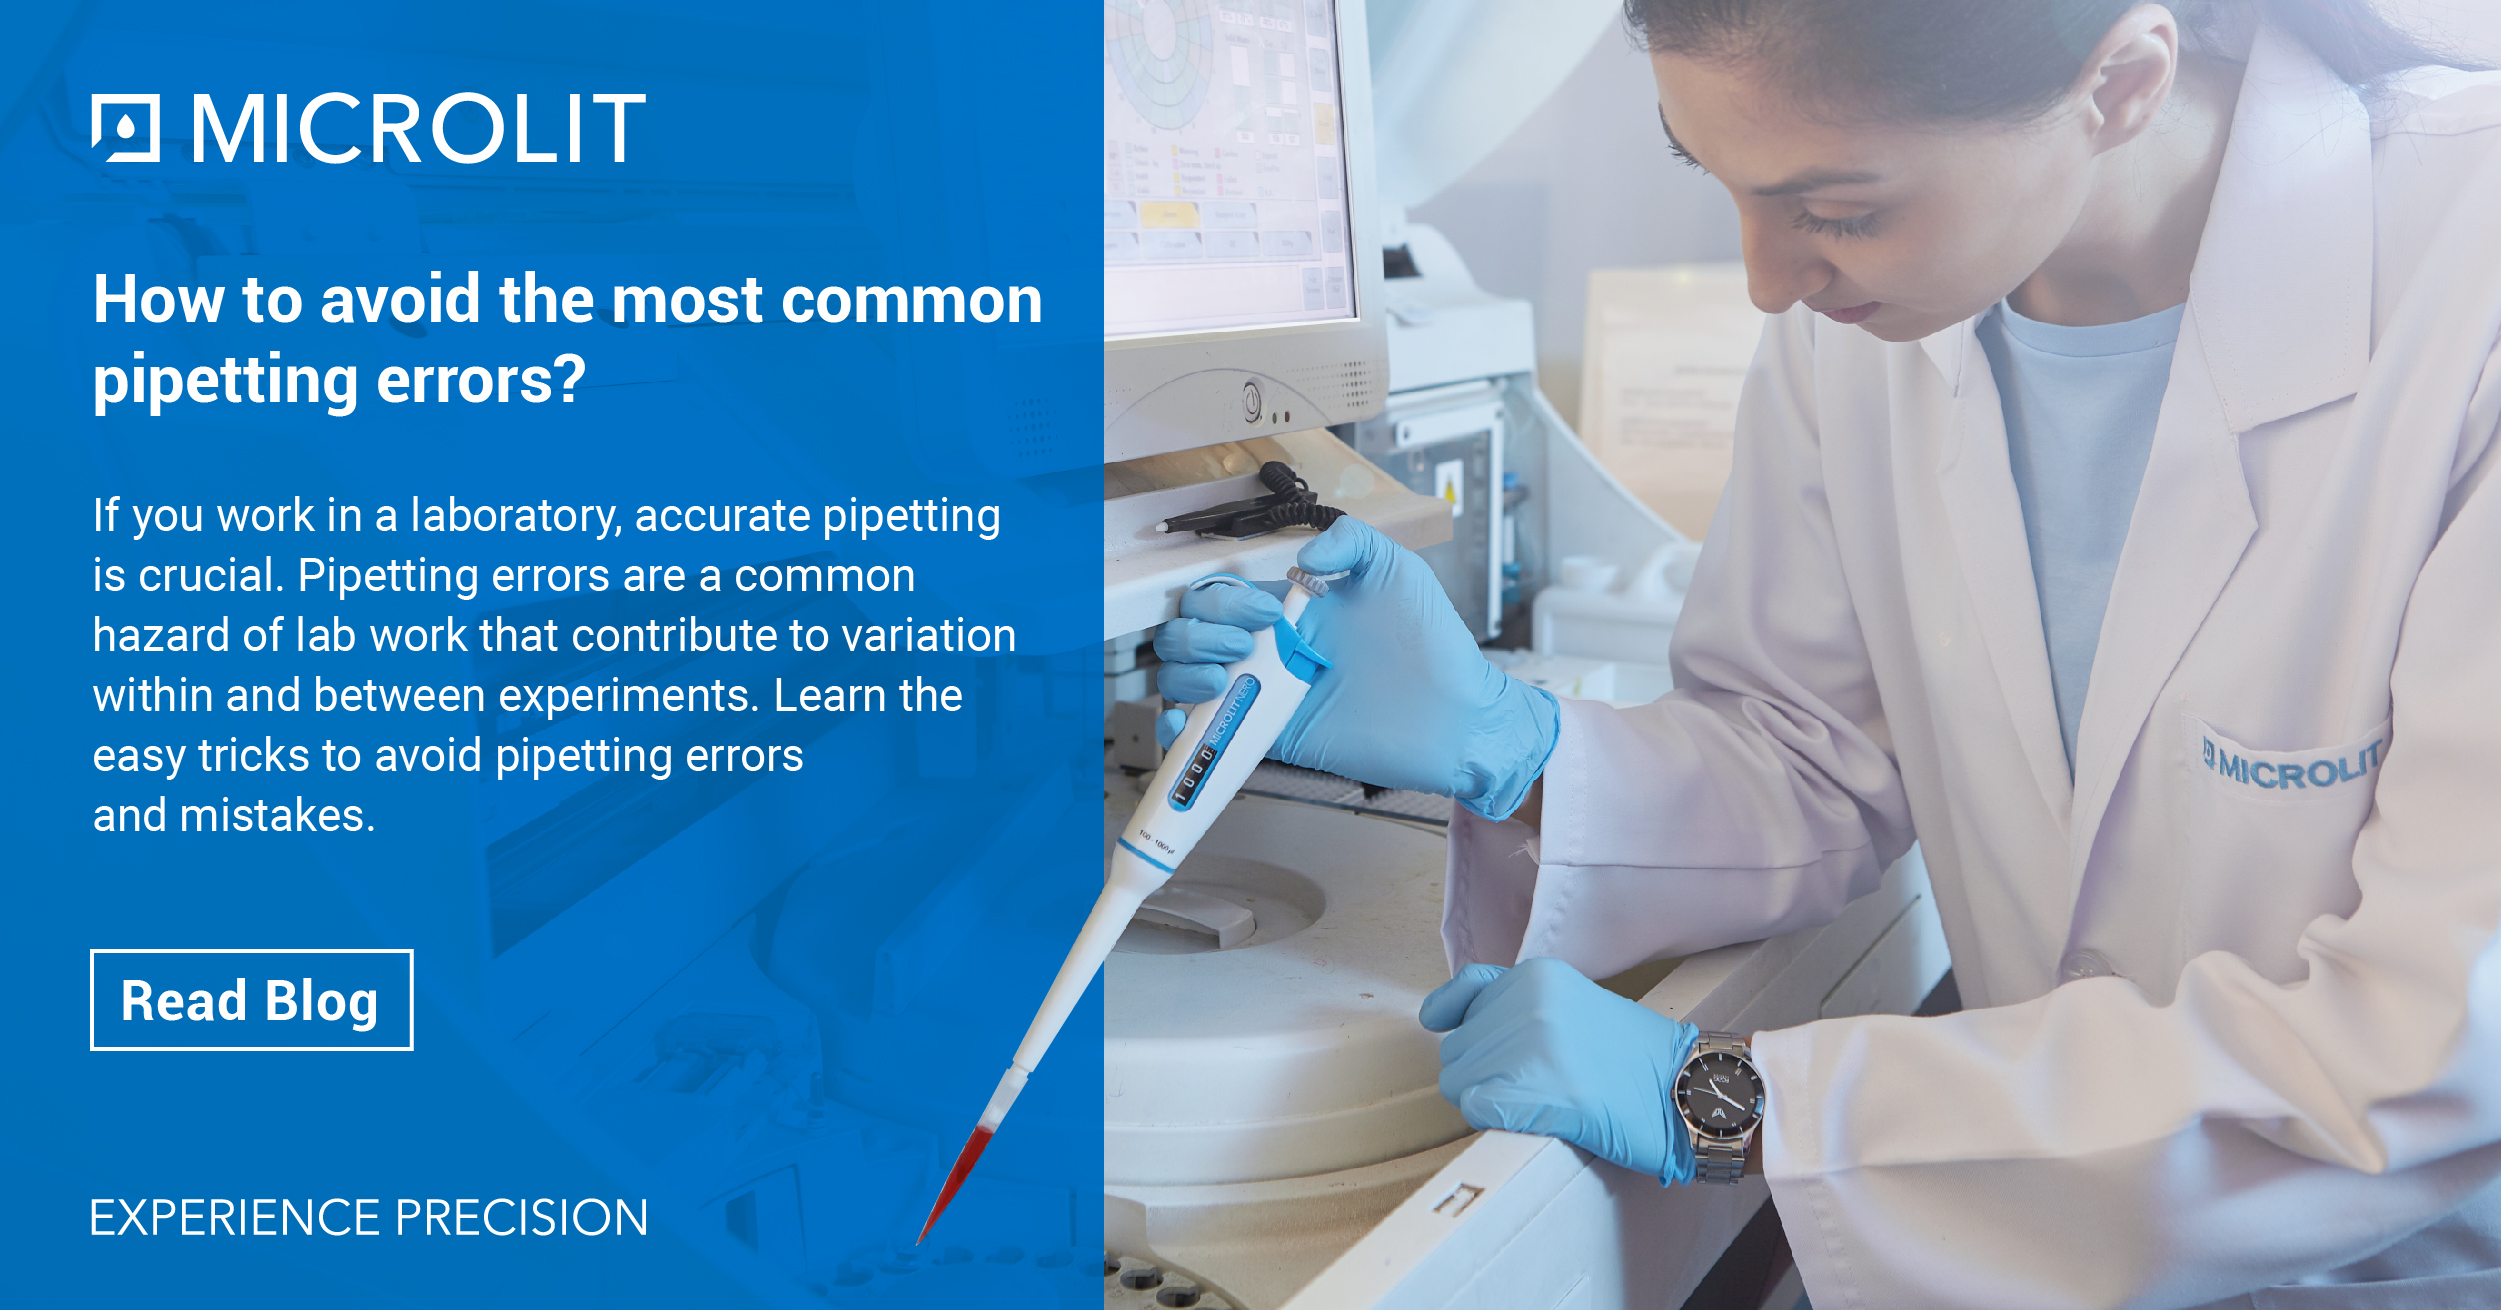 How to avoid the most common pipetting errors?